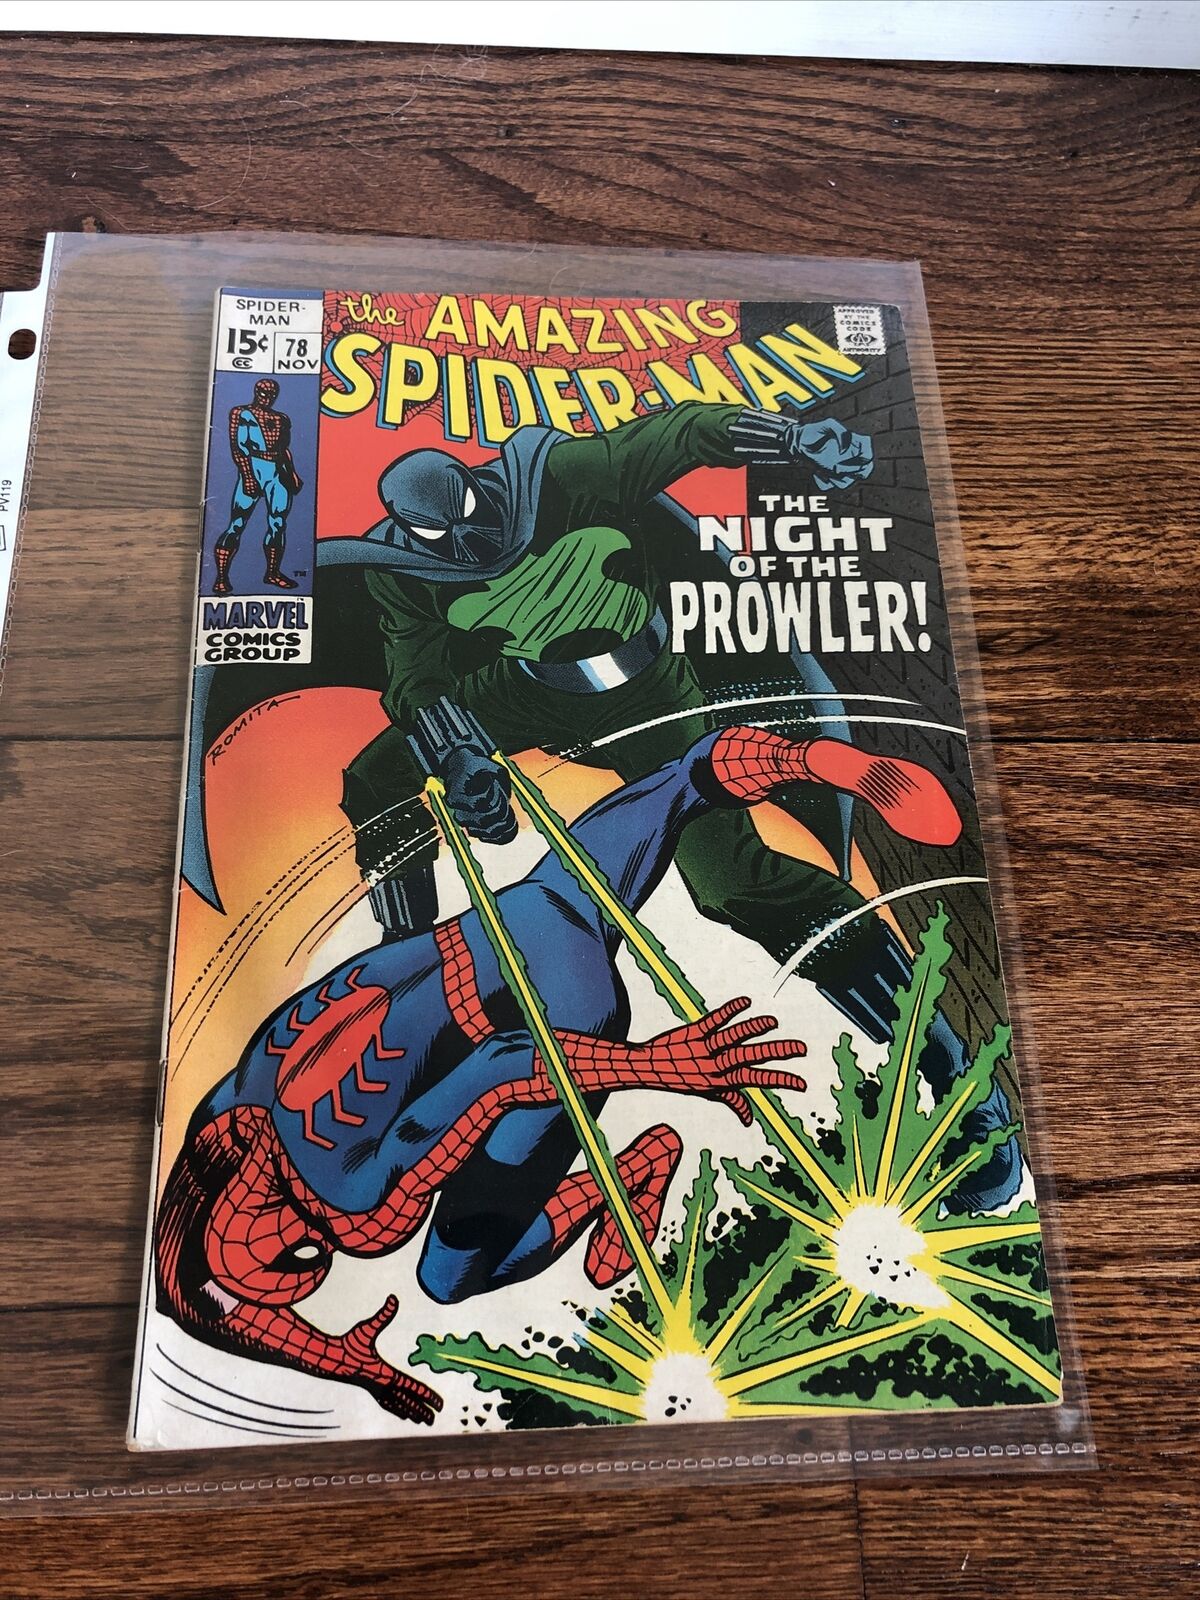 AMAZING SPIDER MAN #78 MARVEL November 1969 First Appearance of the PROWLER